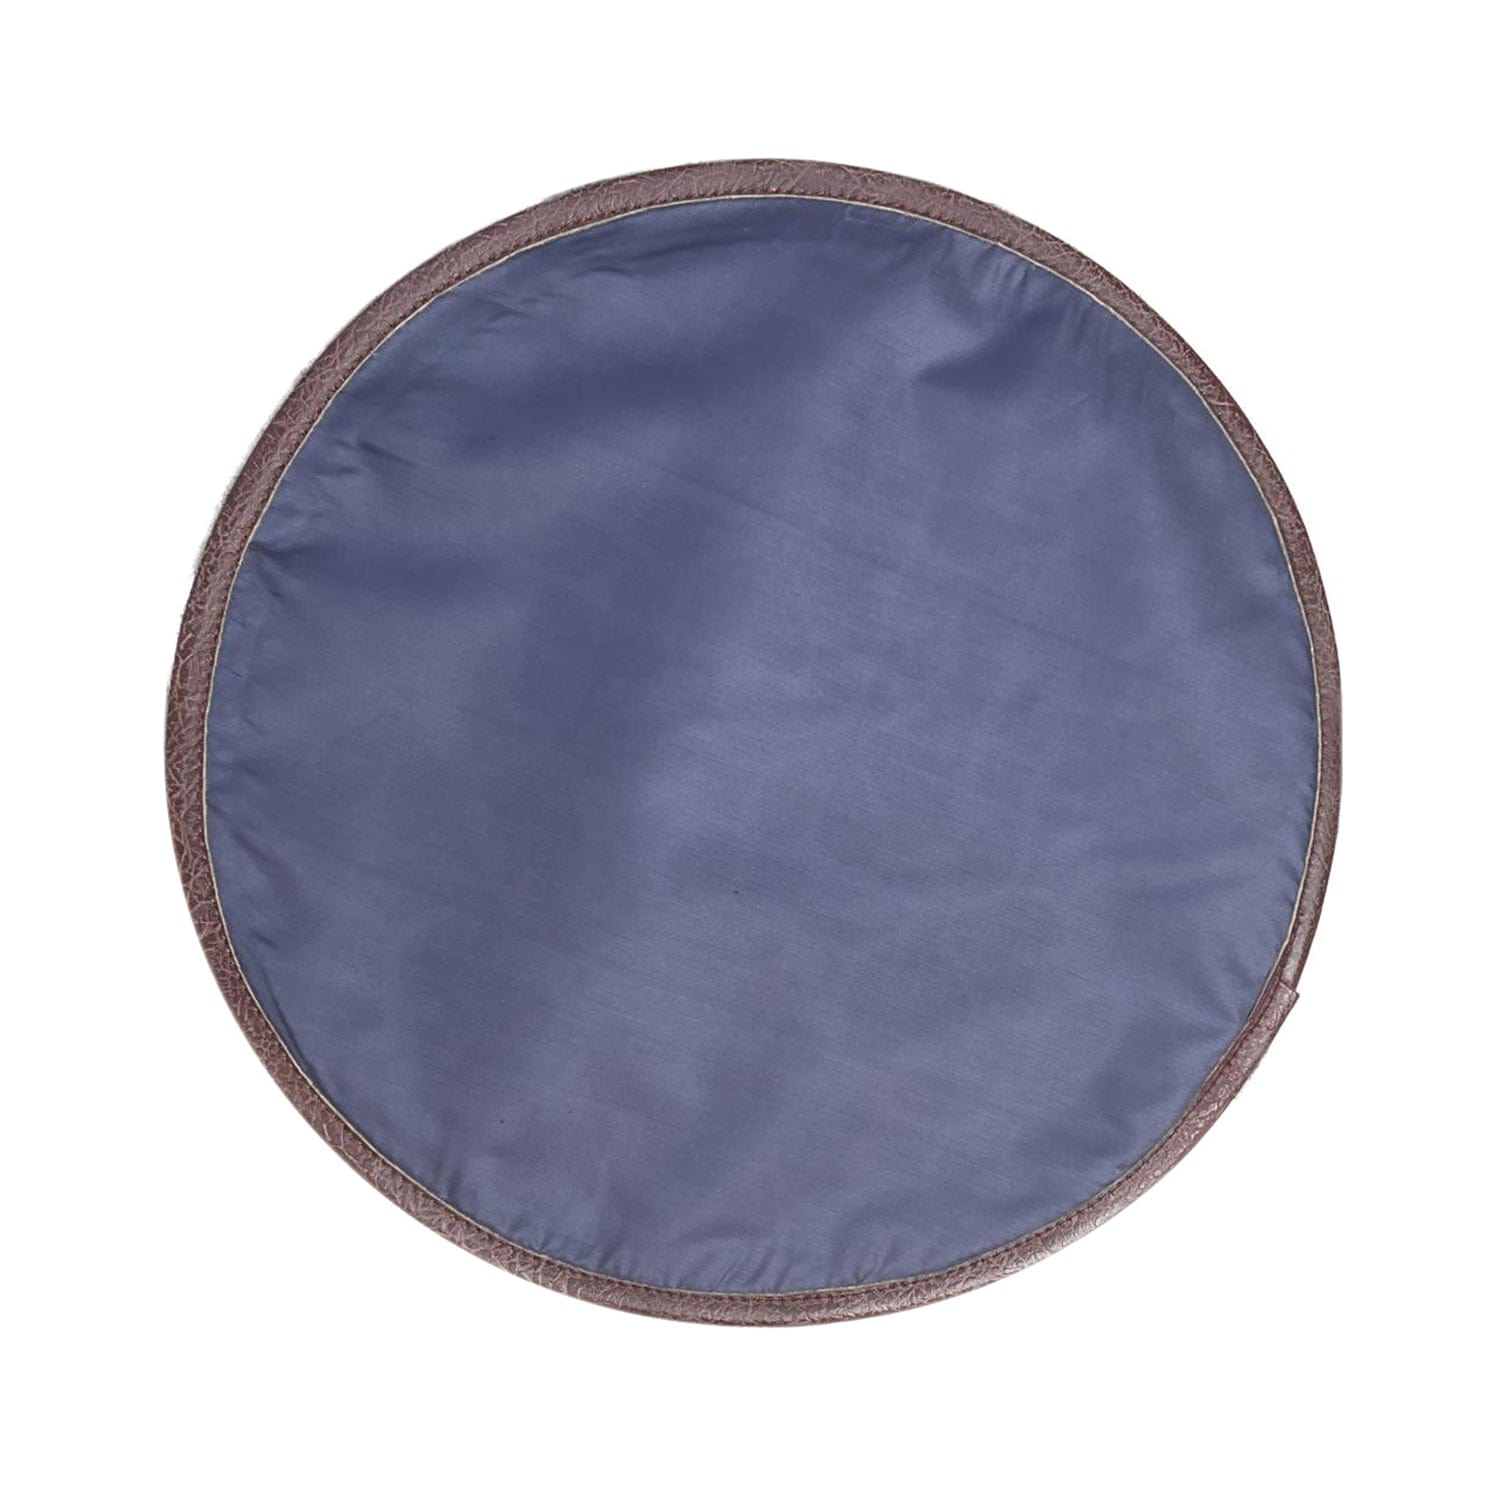 Mona B Set of 2 Printed Mosaic Placemats, 13 INCH Round, Best for Bed-Side Table/Center Table, Dining Table/Shelves (Amelia) - Placemat by Mona-B - Backpack, Flat30, New Arrivals, Sale, Shop1999, Shop2999, Shop3999